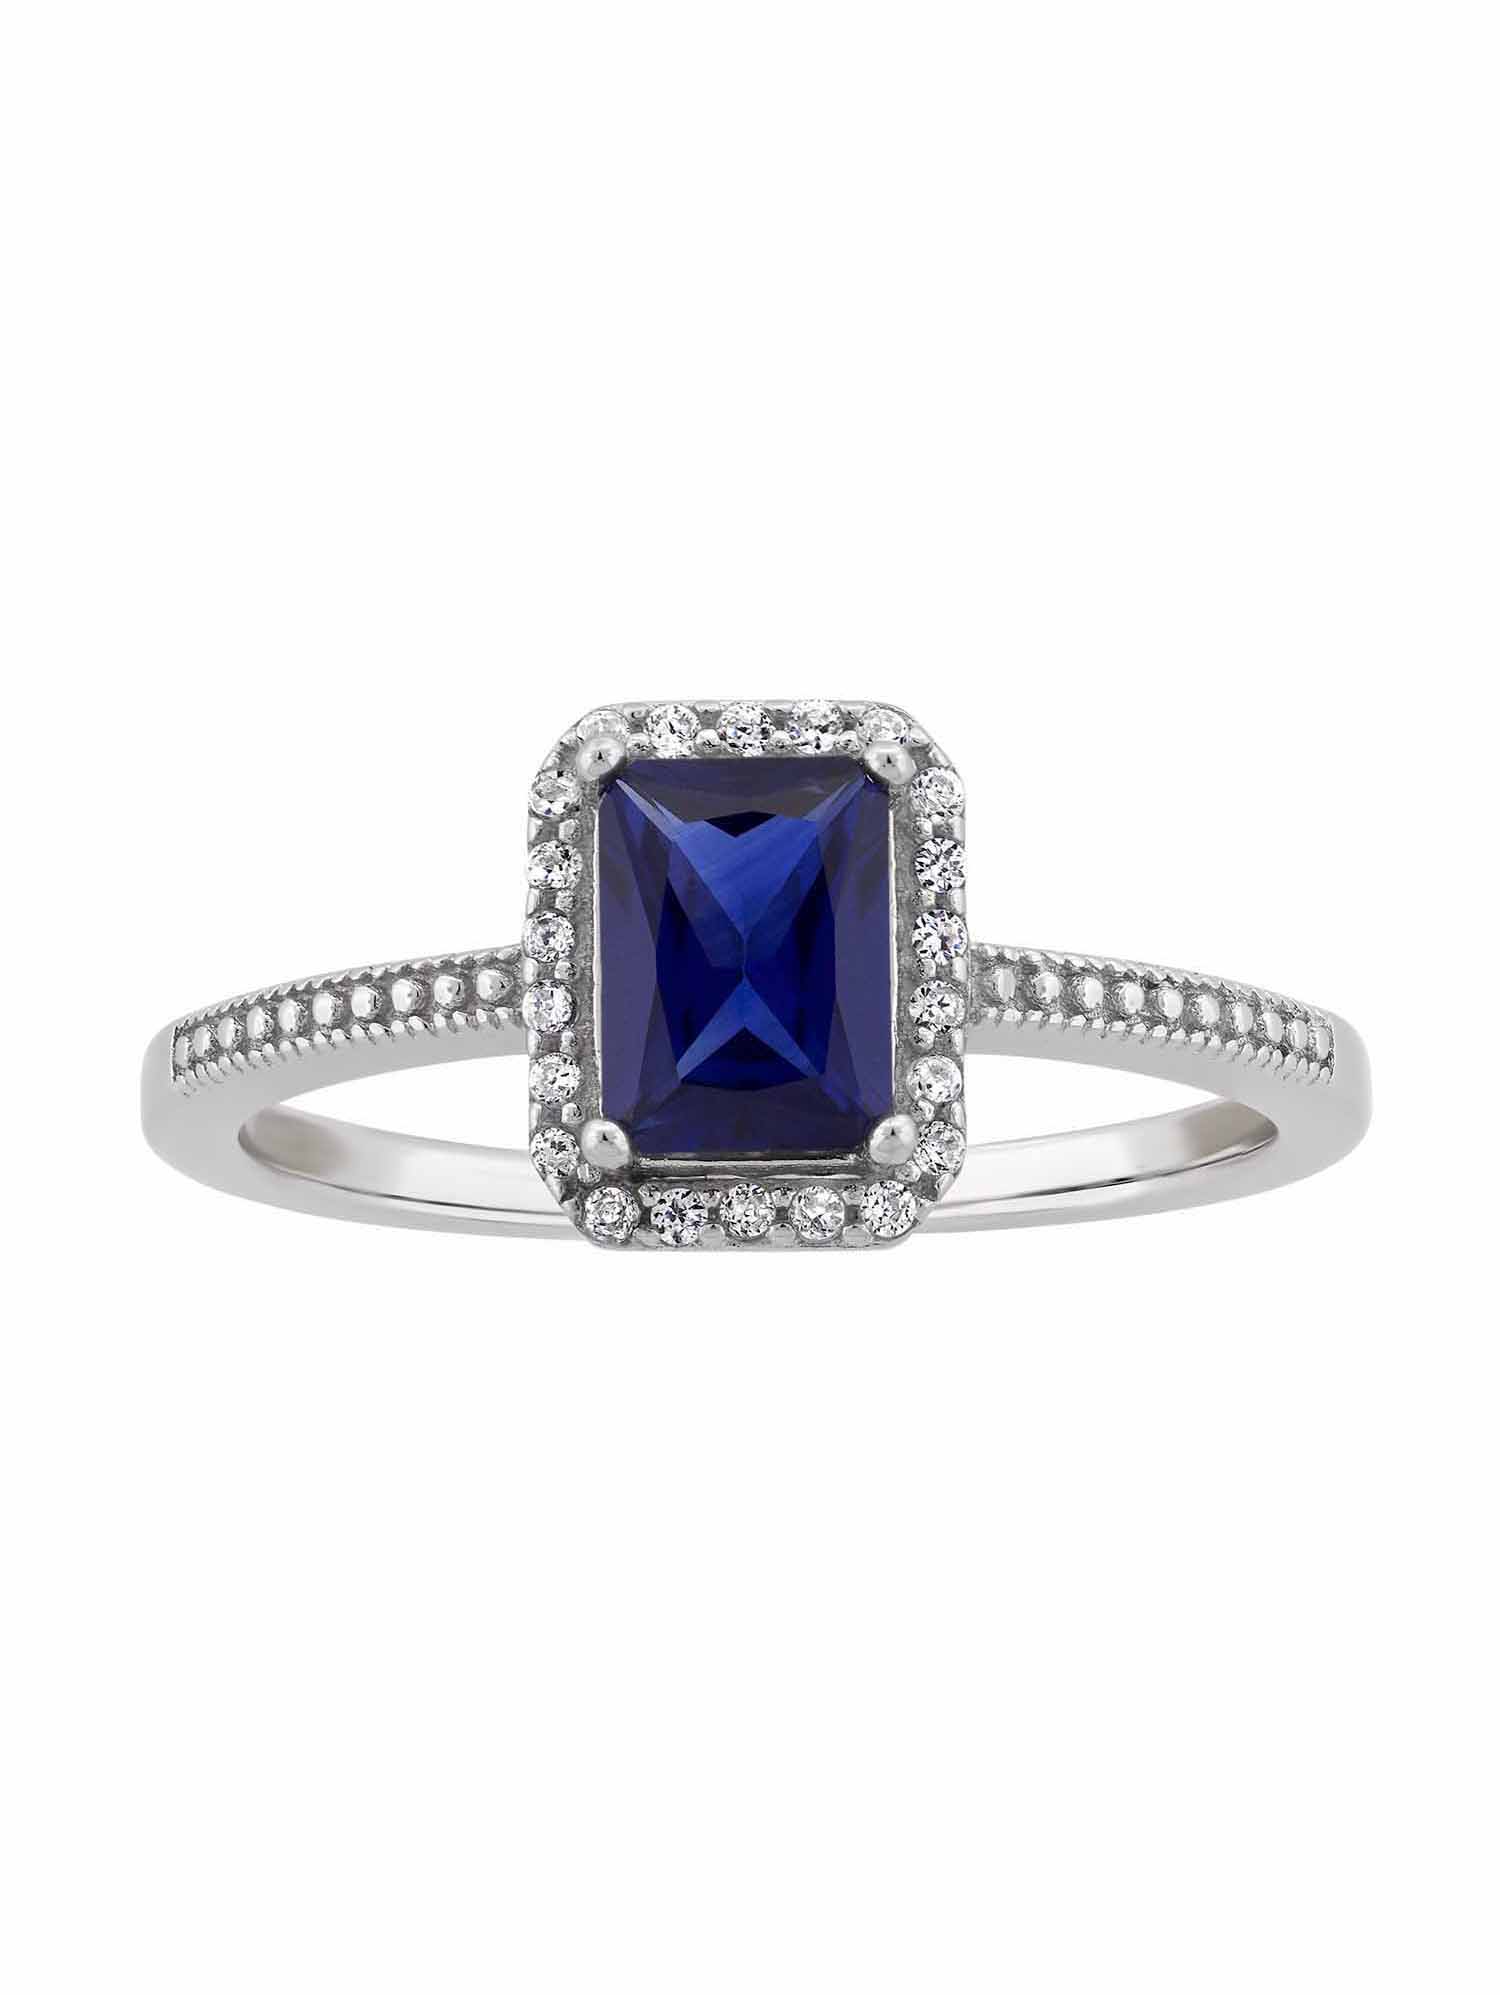 Created Sapphire and CZ Sterling Silver Emerald-Cut Halo Ring - image 1 of 2